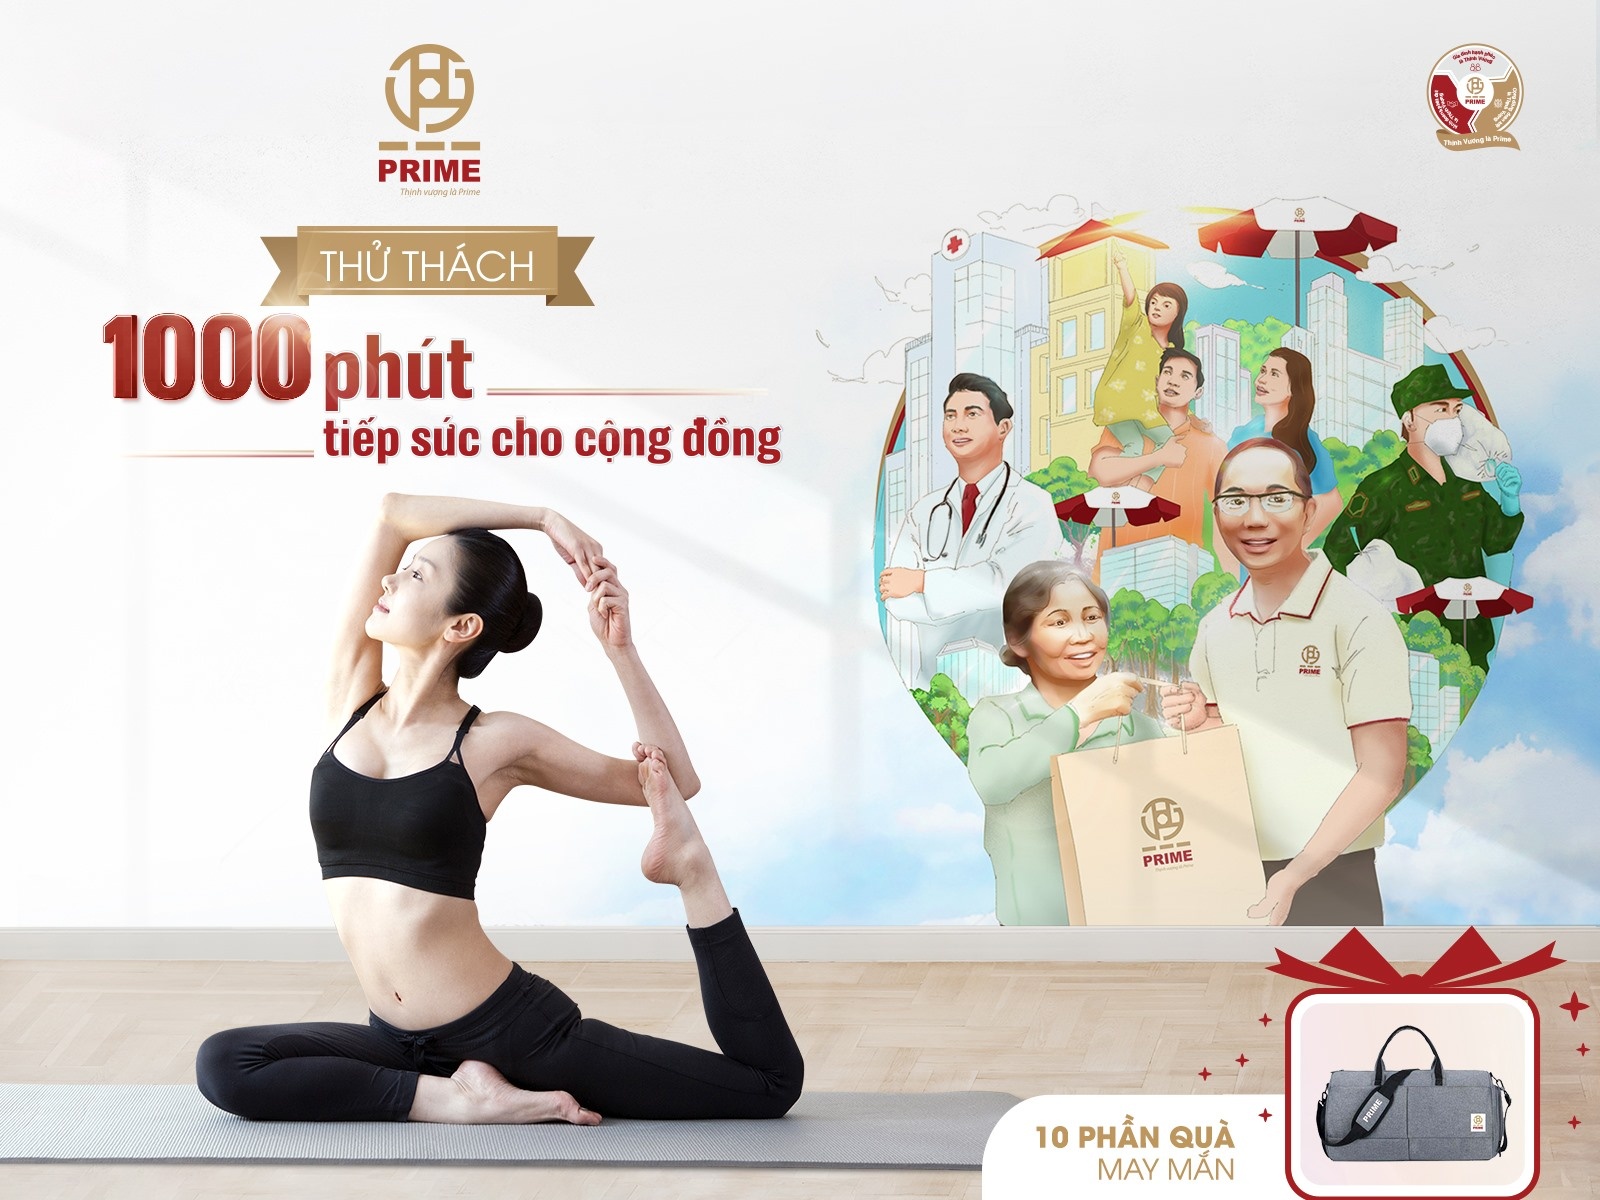 PRIME Group promotes campaign to support community affected by COVID-19 in Vietnam